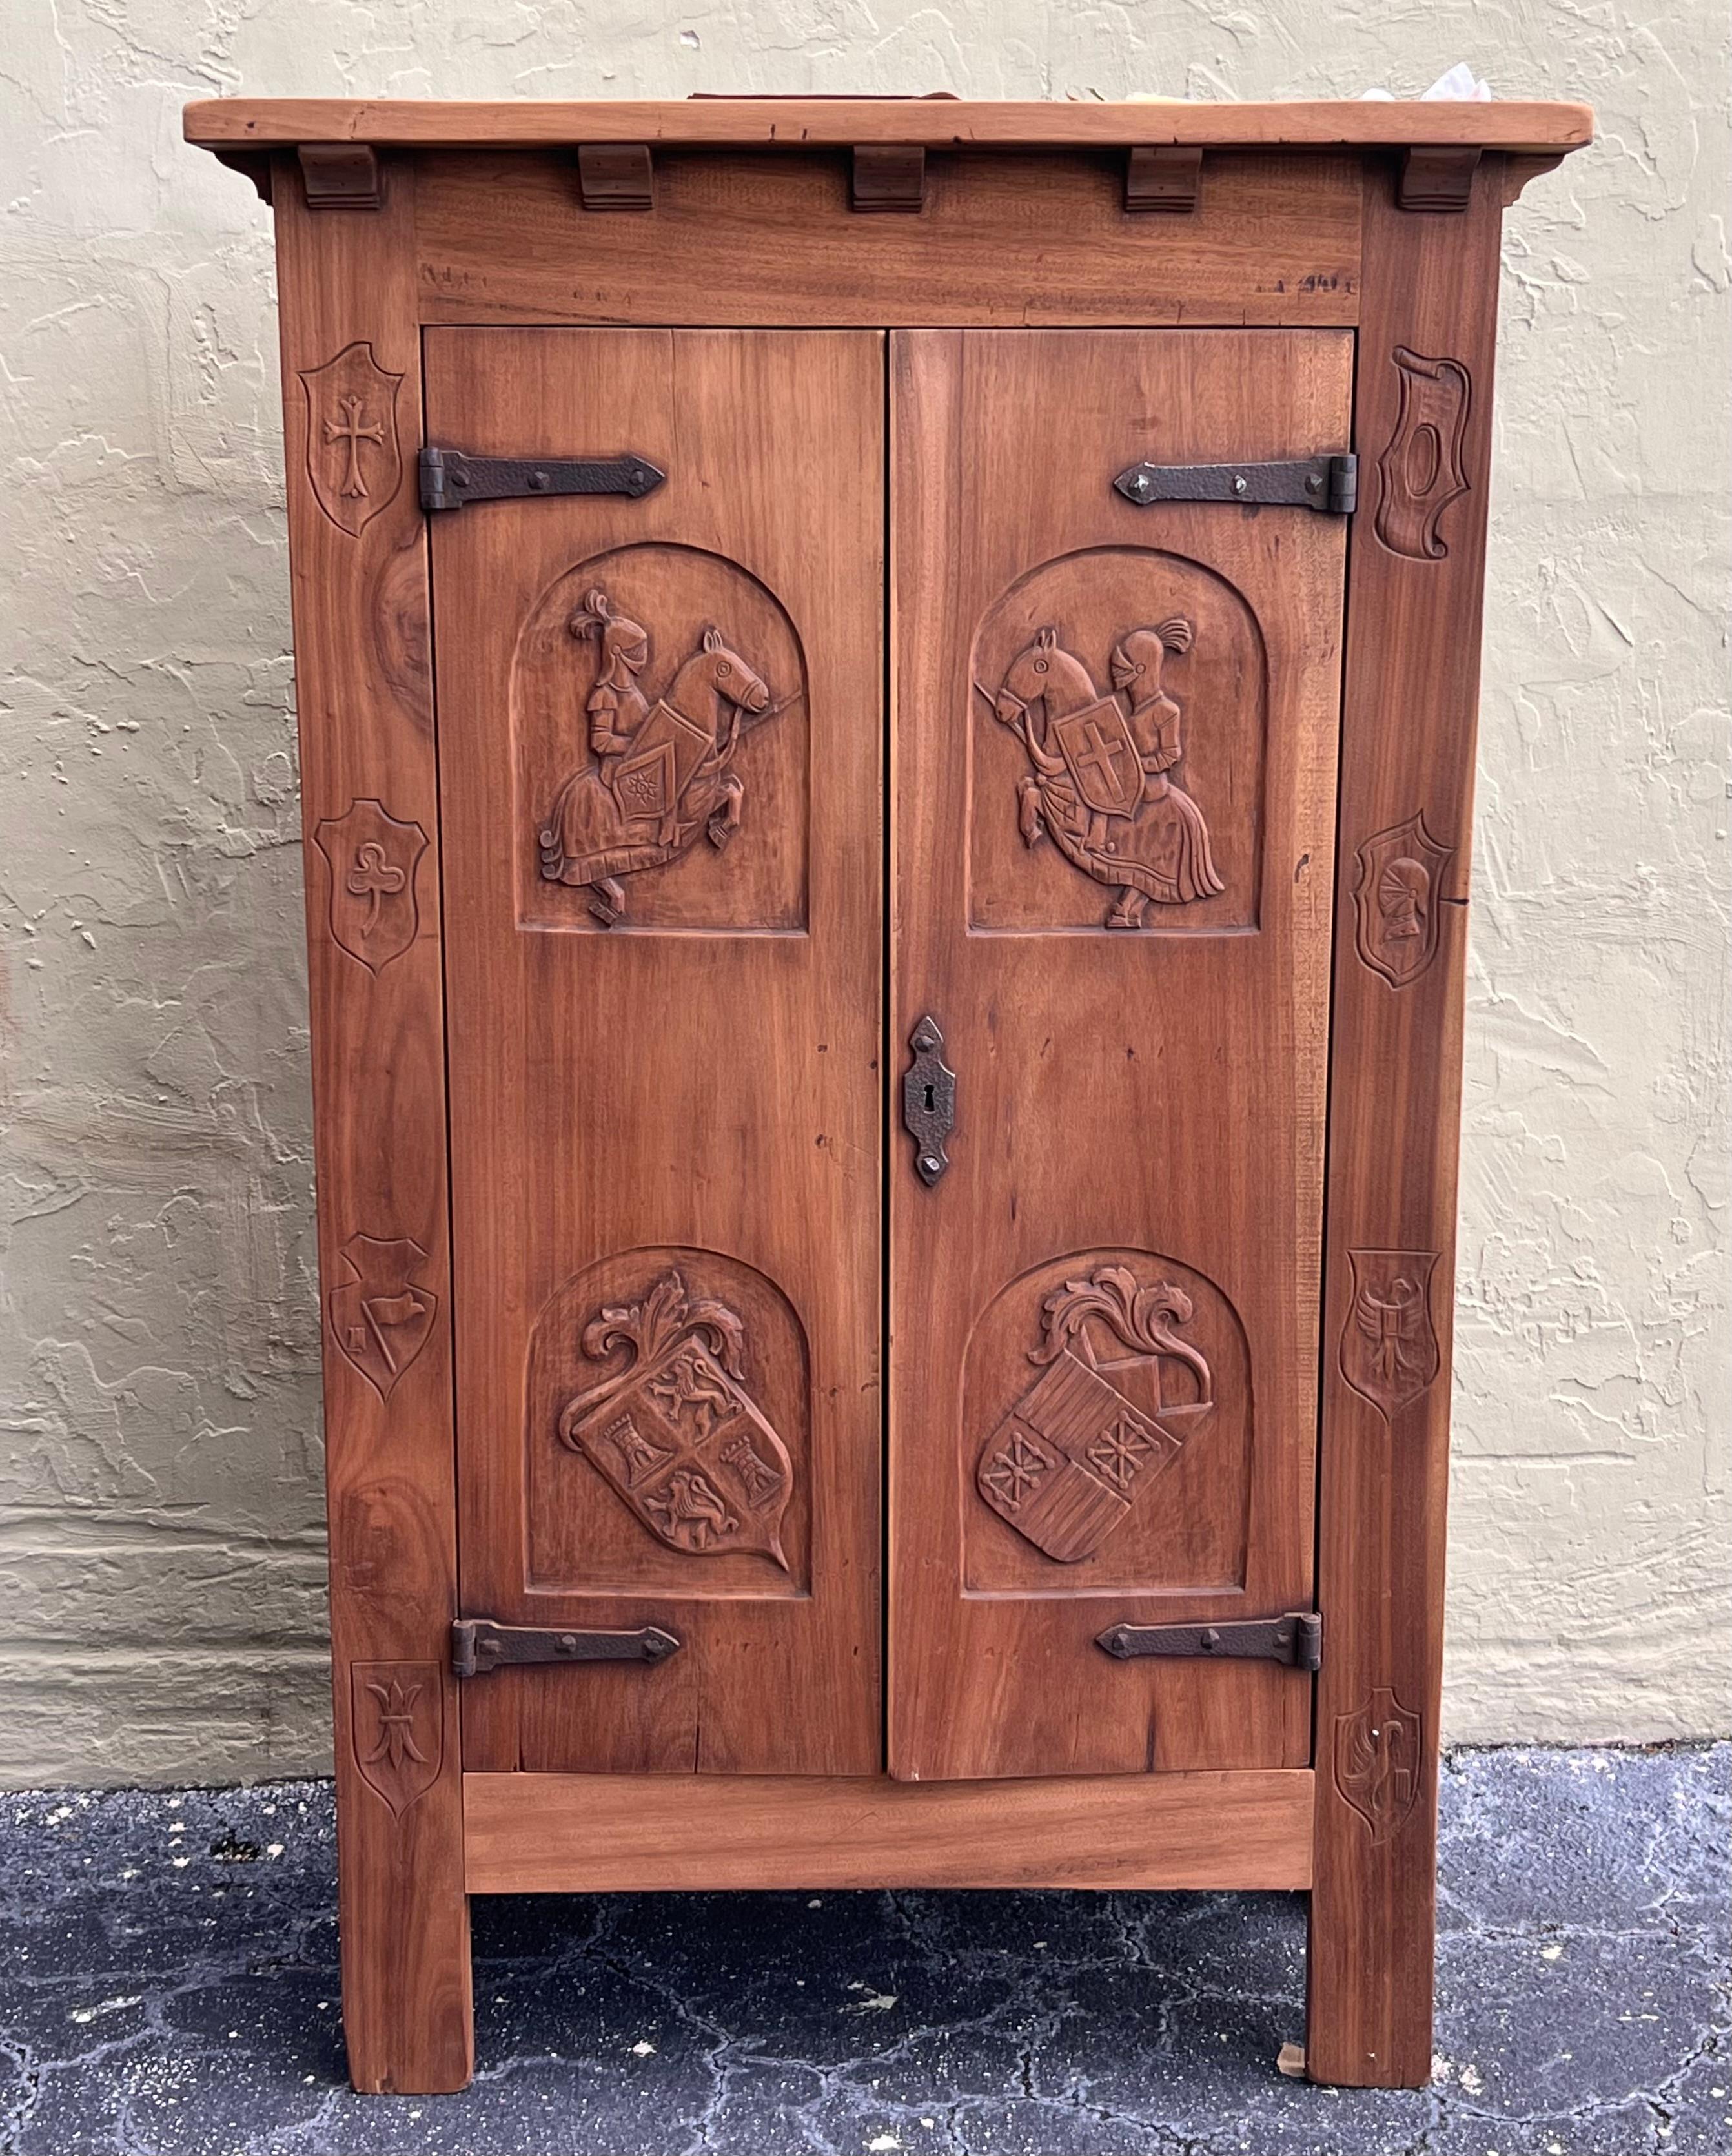 Spanish Gothic Style Walnut wardrobe with Five hangers and carvings
The doors features heads and symbols from gentlemen of this period. 
The original iron hardware makes so special this piece. 